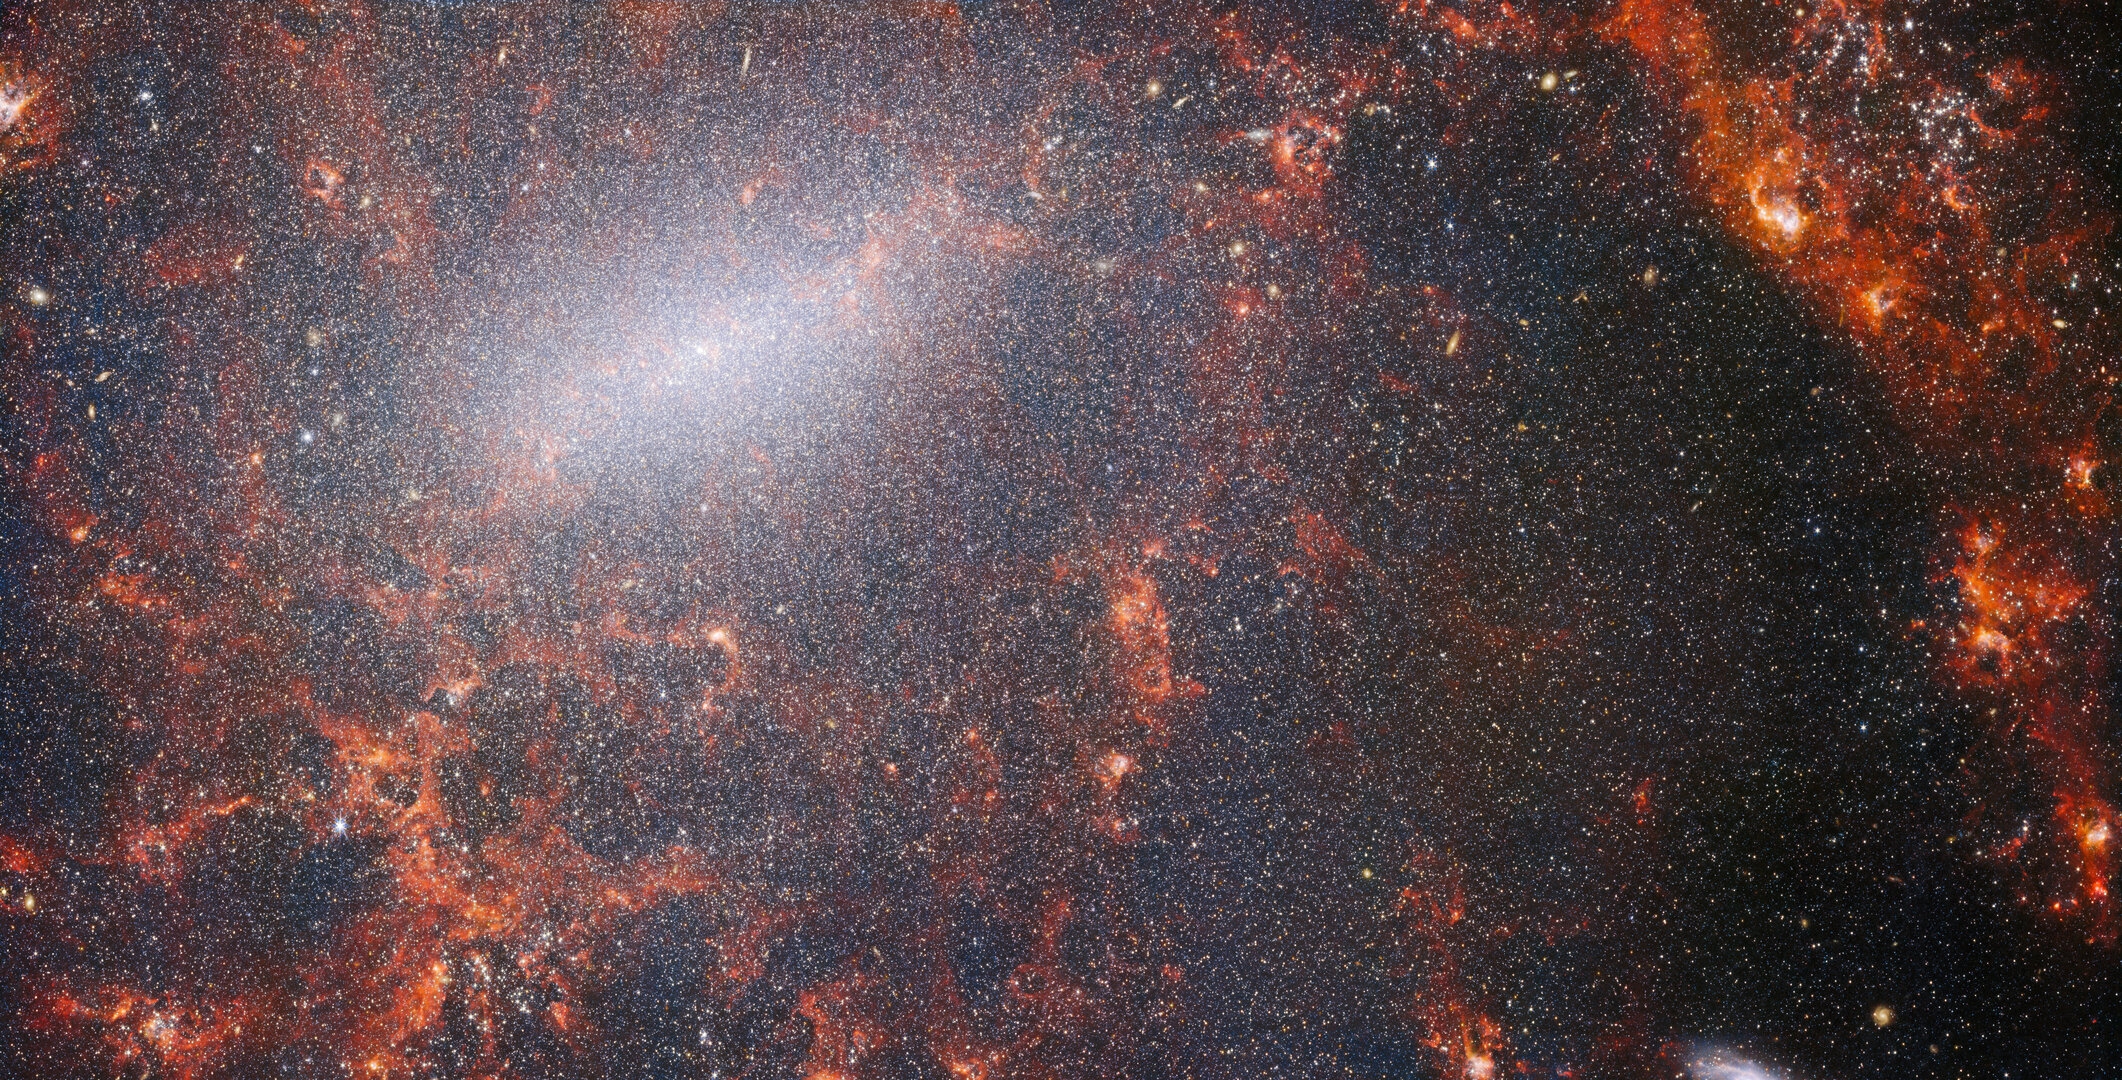 A delicate tracery of dust and bright star clusters threads across this image from the NASA/ESA/CSA James Webb Space Telescope. This view from Webbâ€™s NIRCam instrument is studded by the galaxyâ€™s massive population of stars, most dense along its bright central bar, along with burning red clouds of gas illuminated by young stars within. These glittering stars belong to the barred spiral galaxy NGC 5068, located around 17 million light-years from Earth in the constellation Virgo. This portrait of NGC 5068 is part of a campaign to create an astronomical treasure trove, a repository of observations of star formation in nearby galaxies. Previous gems from this collection can be seen here and here. These observations are particularly valuable to astronomers for two reasons. The first is because star formation underpins so many fields in astronomy, from the physics of the tenuous plasma that lies between stars to the evolution of entire galaxies. By observing the formation of stars in nearby galaxies, astronomers hope to kick-start major scientific advances with some of the first available data from Webb. The second reason is that Webbâ€™s observations build on other studies using telescopes including the NASA/ESA Hubble Space Telescope and some of the worldâ€™s most capable ground-based observatories. Webb collected images of 19 nearby star-forming galaxies which astronomers could then combine with catalogues from Hubble of 10 000 star clusters, spectroscopic mapping of 20Â 000 star-forming emission nebulae from the Very Large Telescope (VLT), and observations of 12Â 000 dark, dense molecular clouds identified by the Atacama Large Millimeter/submillimeter Array (ALMA). These observations span the electromagnetic spectrum and give astronomers an unprecedented opportunity to piece together the minutiae of star formation. This near-infrared image of the galaxy is filled by the enormous gathering of older stars which make up the core of NGC 5068. The keen vision of NIRCam allows astronomers to peer through the galaxyâ€™s gas and dust to closely examine its stars. Dense and bright clouds of dust lie along the path of the spiral arms: these are H II regions, collections of hydrogen gas where new stars are forming. The young, energetic stars ionise the hydrogen around them which, when combined with hot dust emission, creates this reddish glow. H II regions form a fascinating target for astronomers, and Webbâ€™s instruments are the perfect tools to examine them, resulting in this image. [Image Description: A close-in image of a spiral galaxy, showing its core and part of a spiral arm. At this distance thousands upon thousands of tiny stars that make up the galaxy can be seen. The stars are most dense in a whitish bar that forms the core, and less dense out from that towards the arm. Bright red gas clouds follow the twist of the galaxy and the spiral arm.] Links  NGC 5068 (NIRCam+MIRI Image) NGC 5068 (MIRI Image) Slider Tool (MIRI and NIRCam images) Video: Pan of NGC 5068 Video: Webb's views of NGC 5068 (MIRI and NIRCam images) Video: Zoom into NGC 5068 | DeviceDaily.com